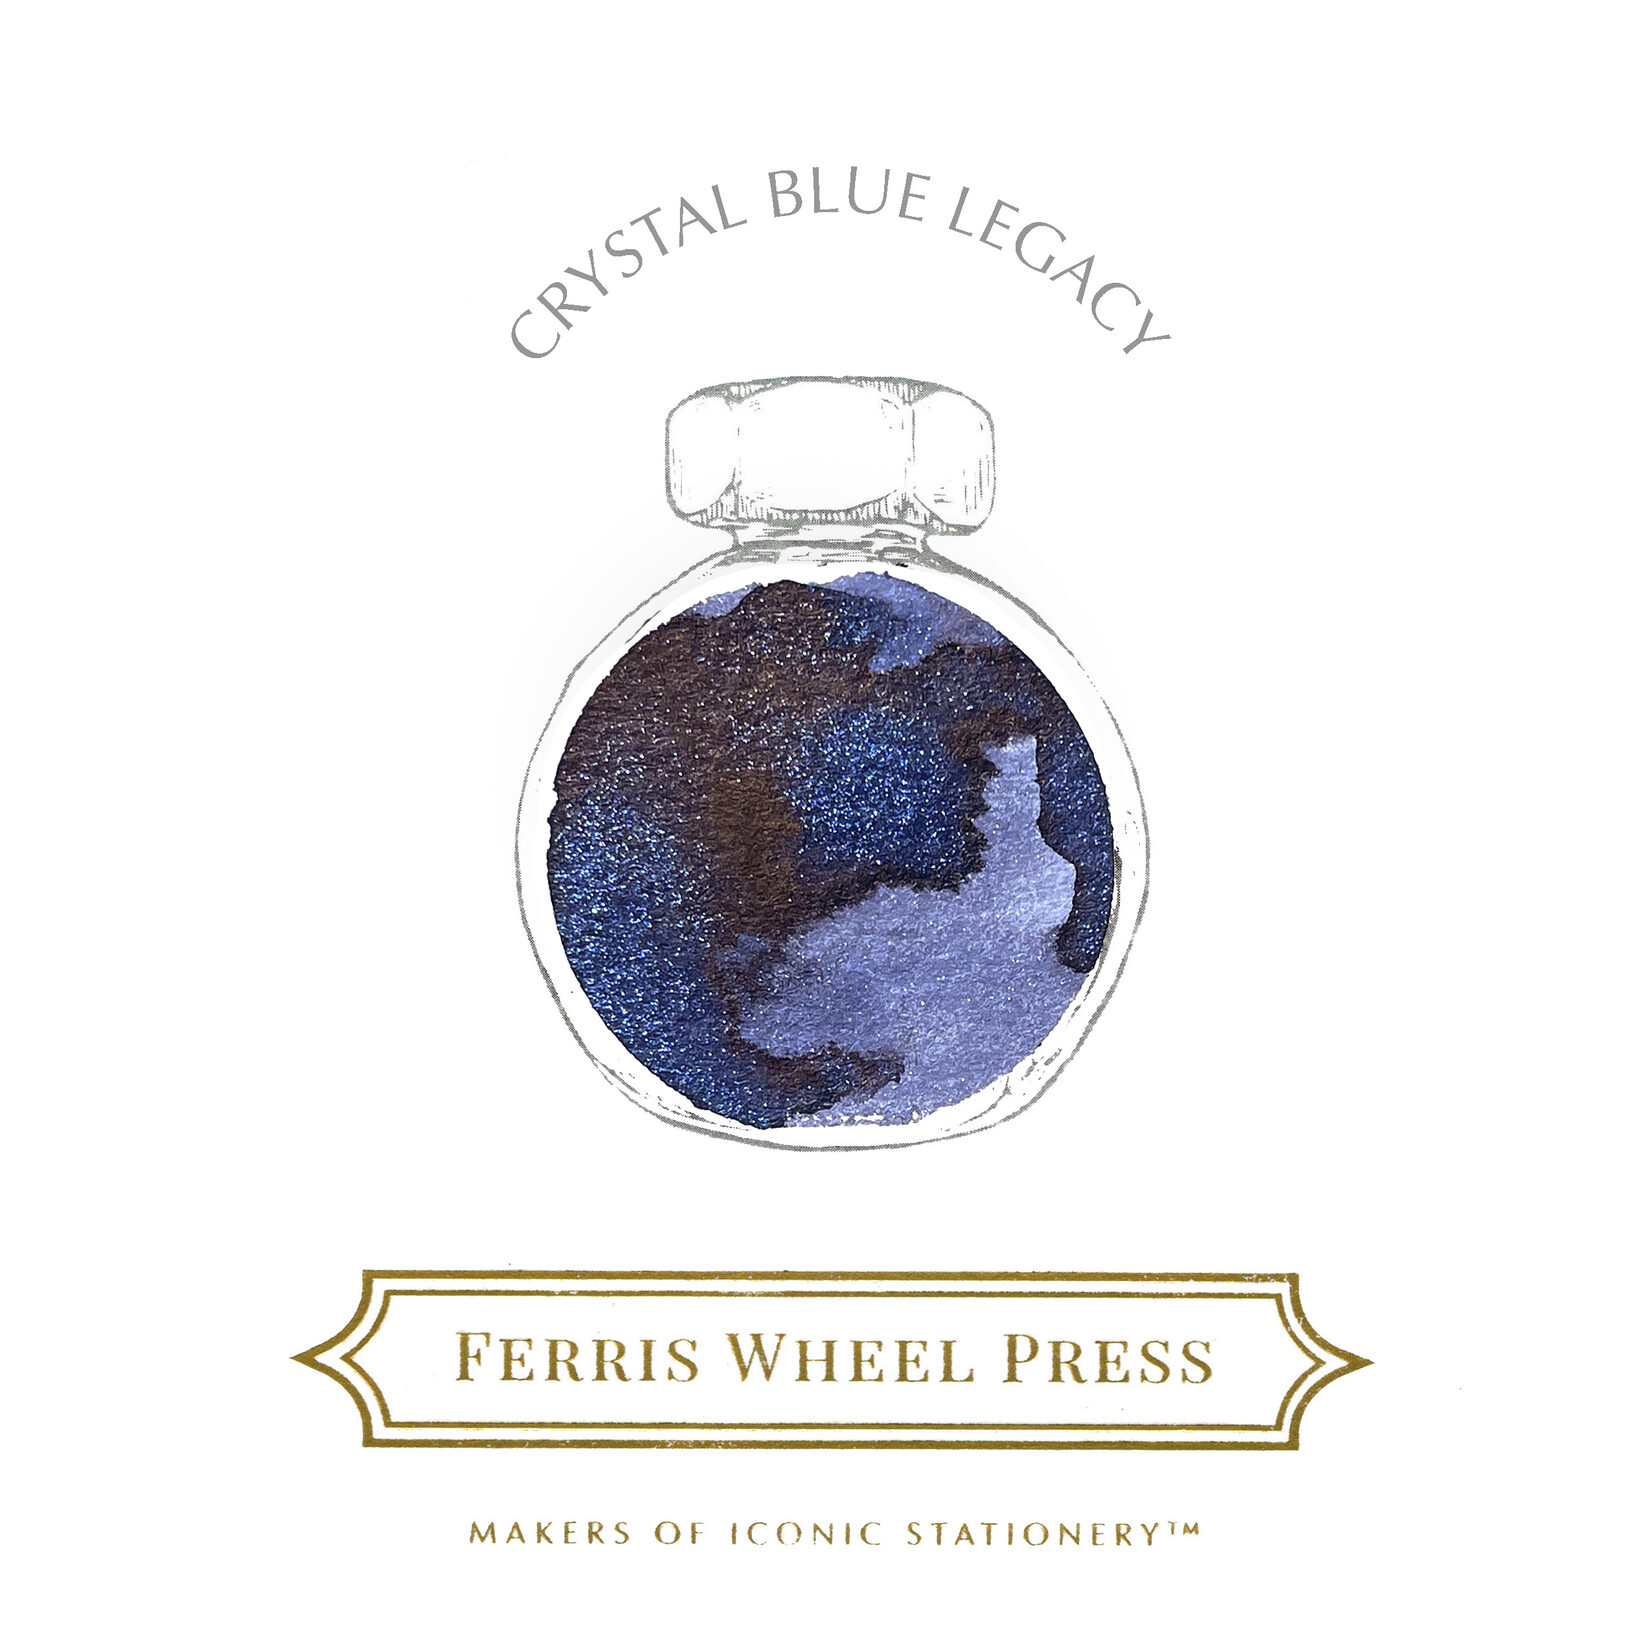 FERRIS WHEEL PRESS INK CHARGER SET FROSTED CARNIVAL COLLECTION